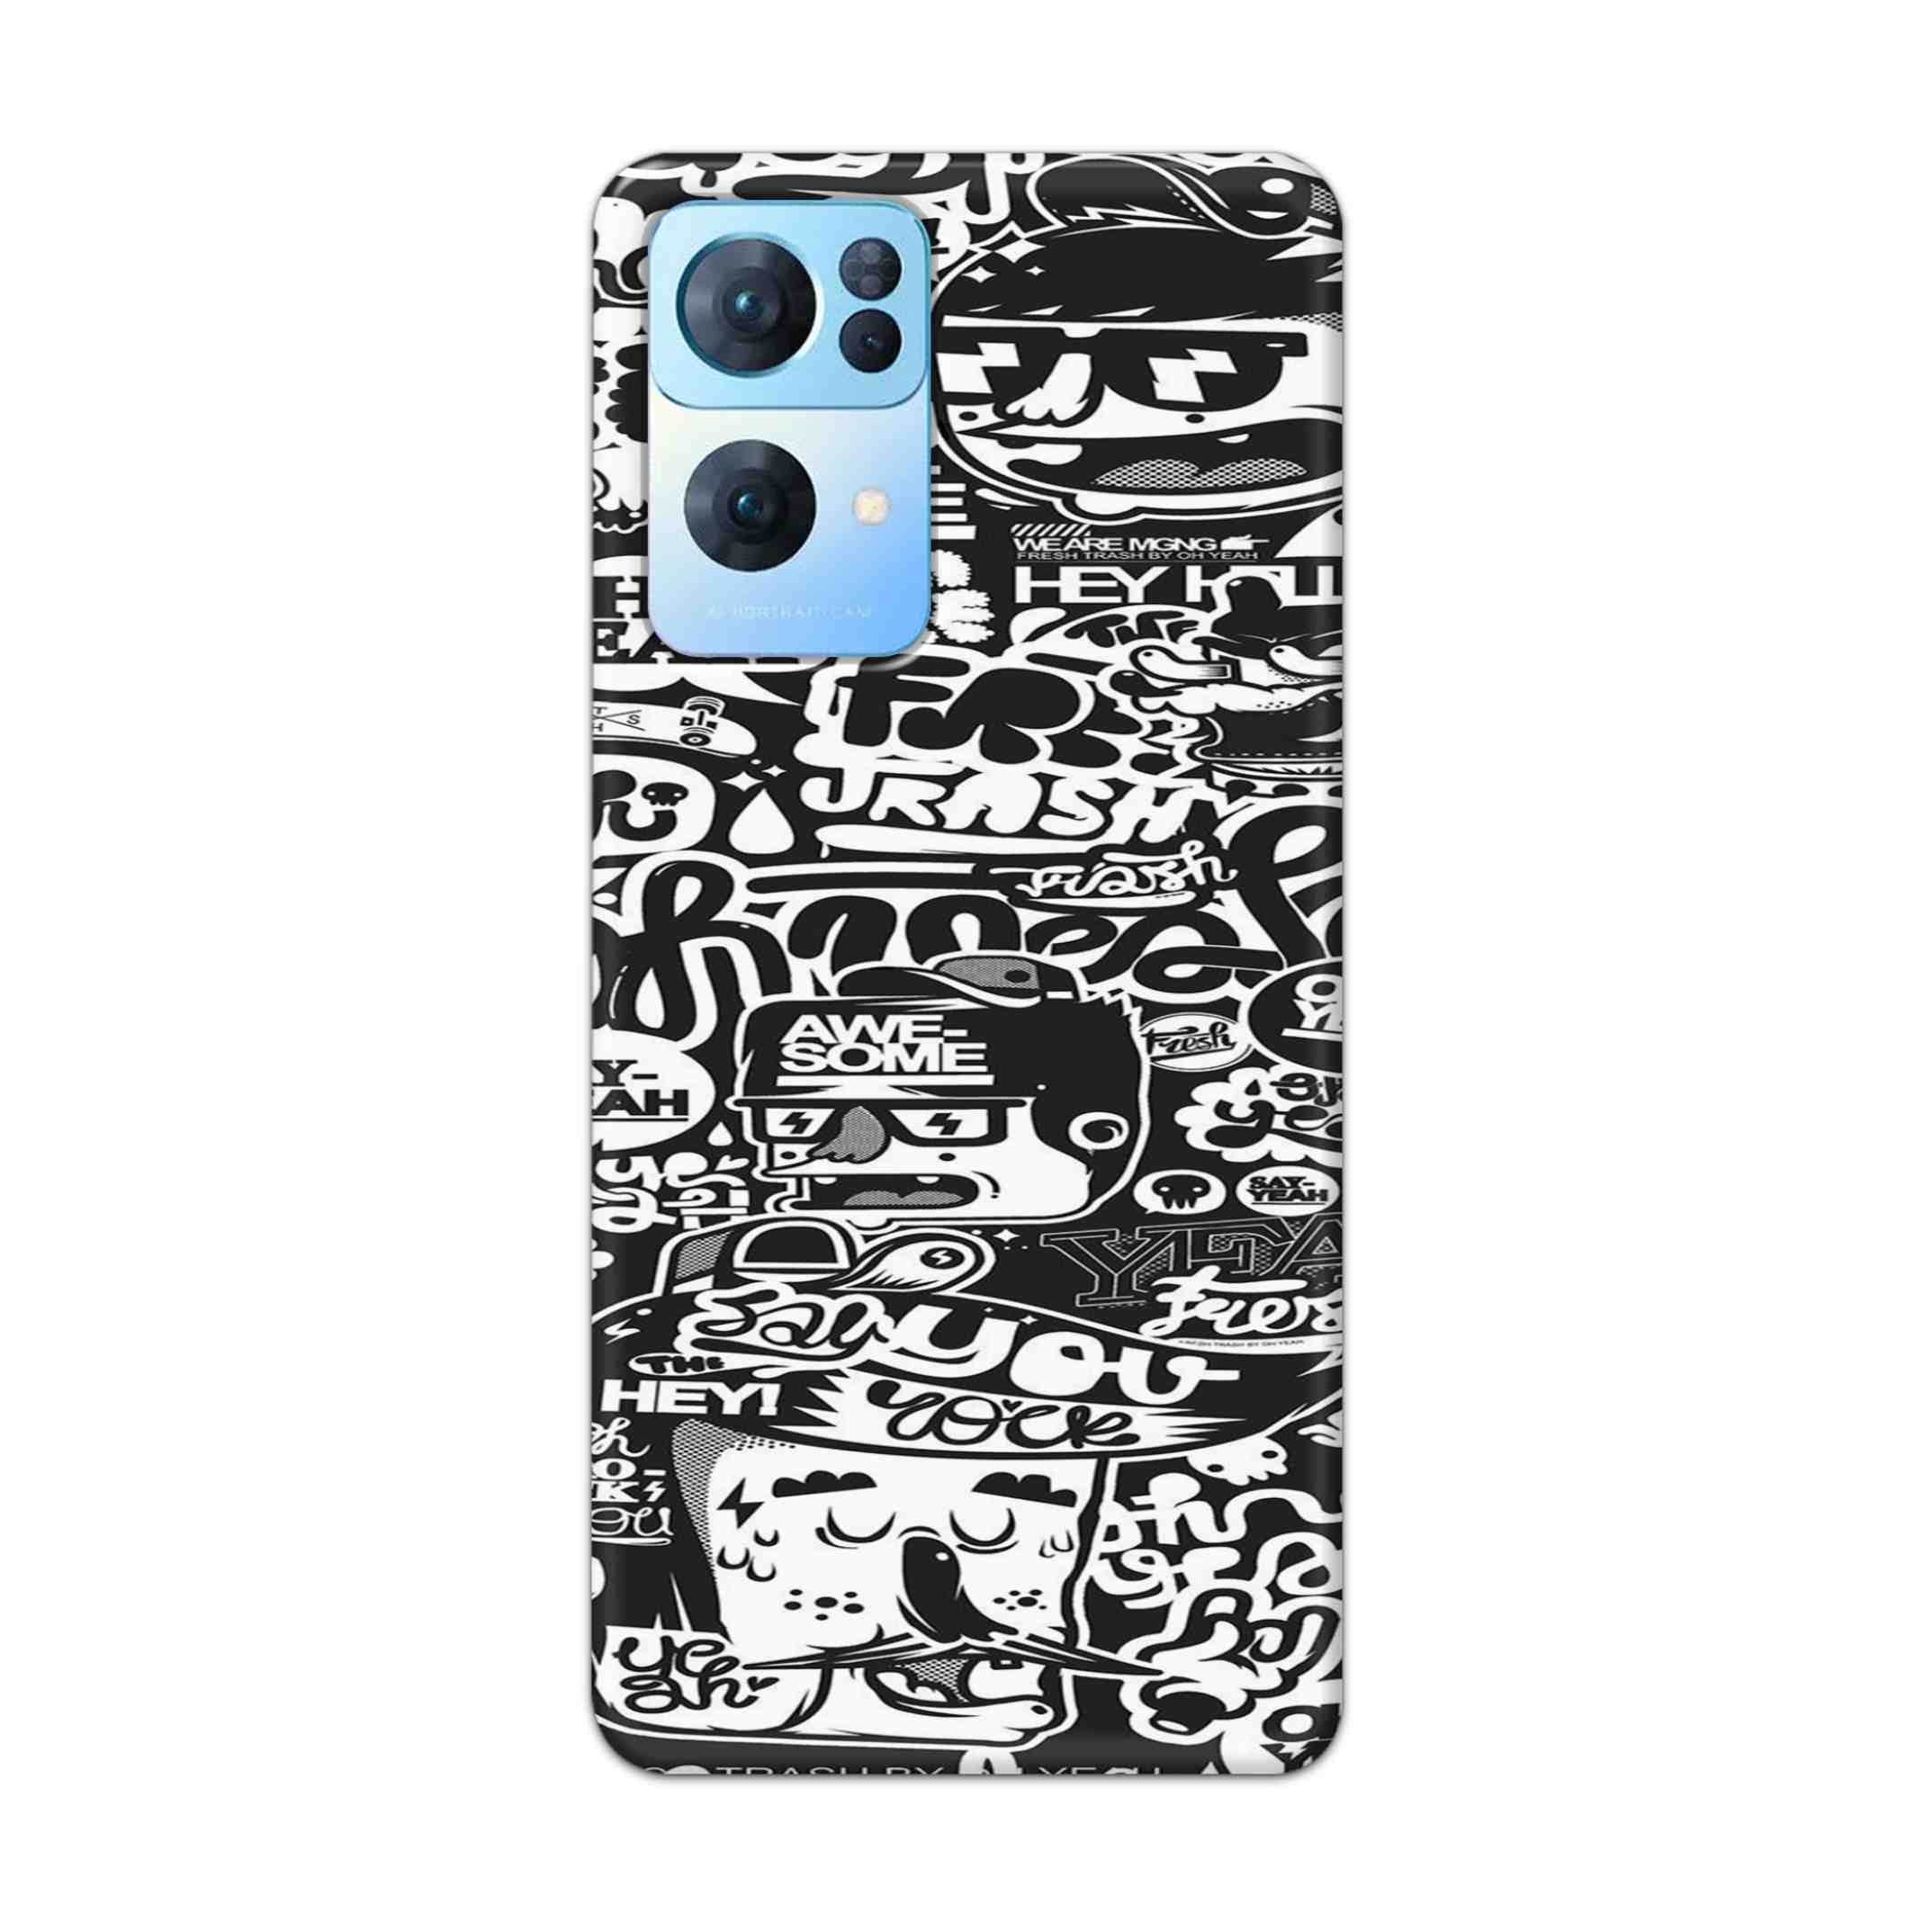 Buy Awesome Hard Back Mobile Phone Case Cover For Oppo Reno 7 Pro Online